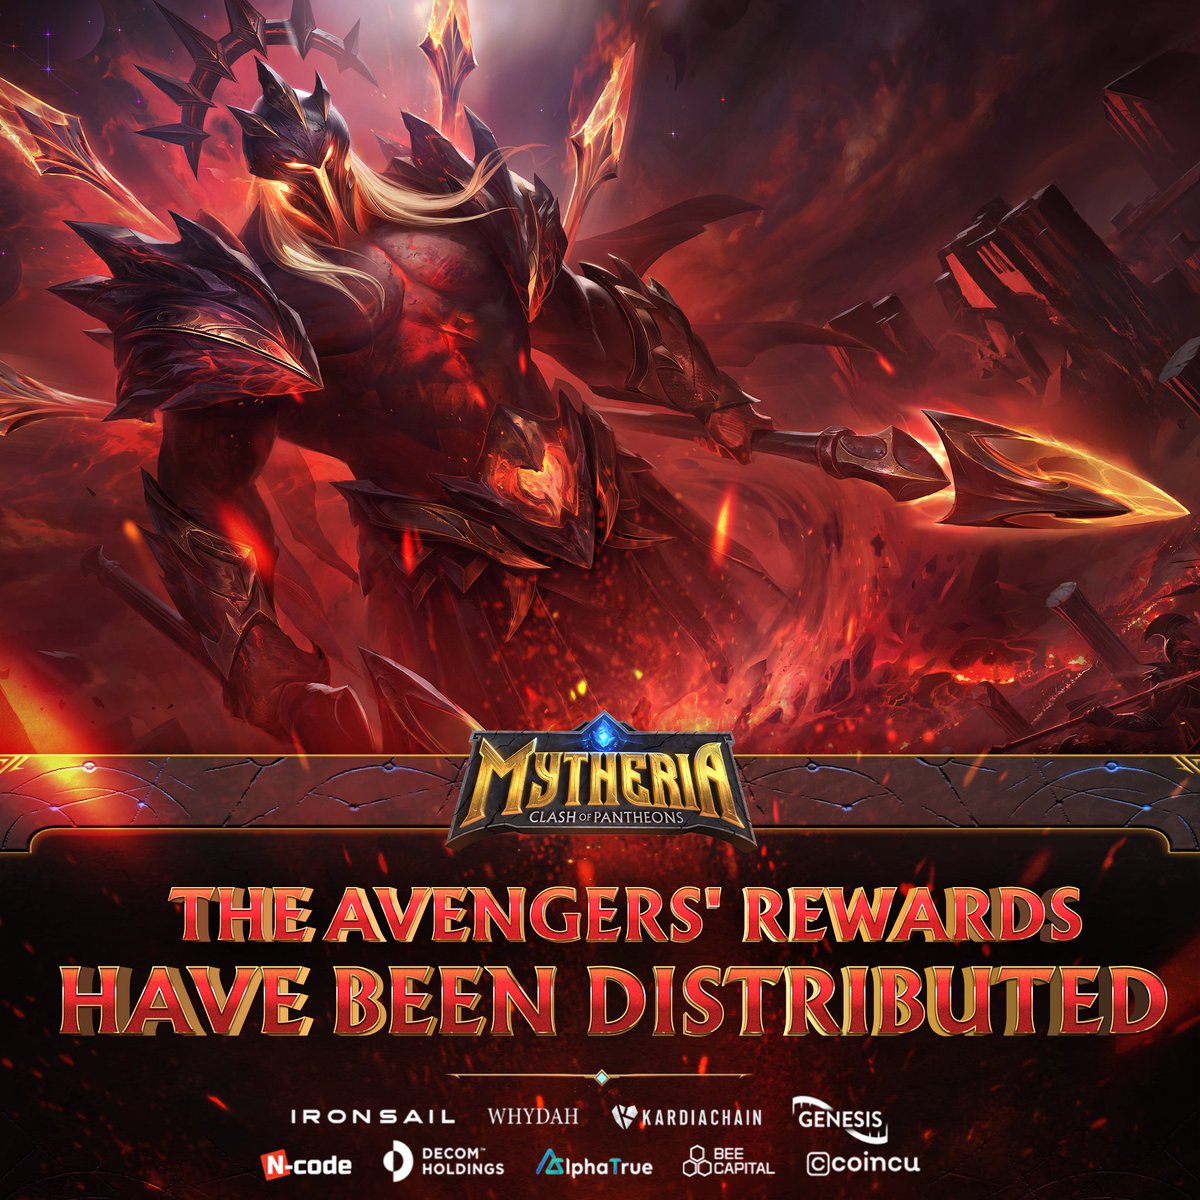 [ANNOUNCEMENT] THE AVENGERS EVENT BONUS ALREADY OUT Hey mighty warriors of Mytheria, quickly log in to the reward page to own the winning gift from The Avengers event Log in now: reward.mytheria.io